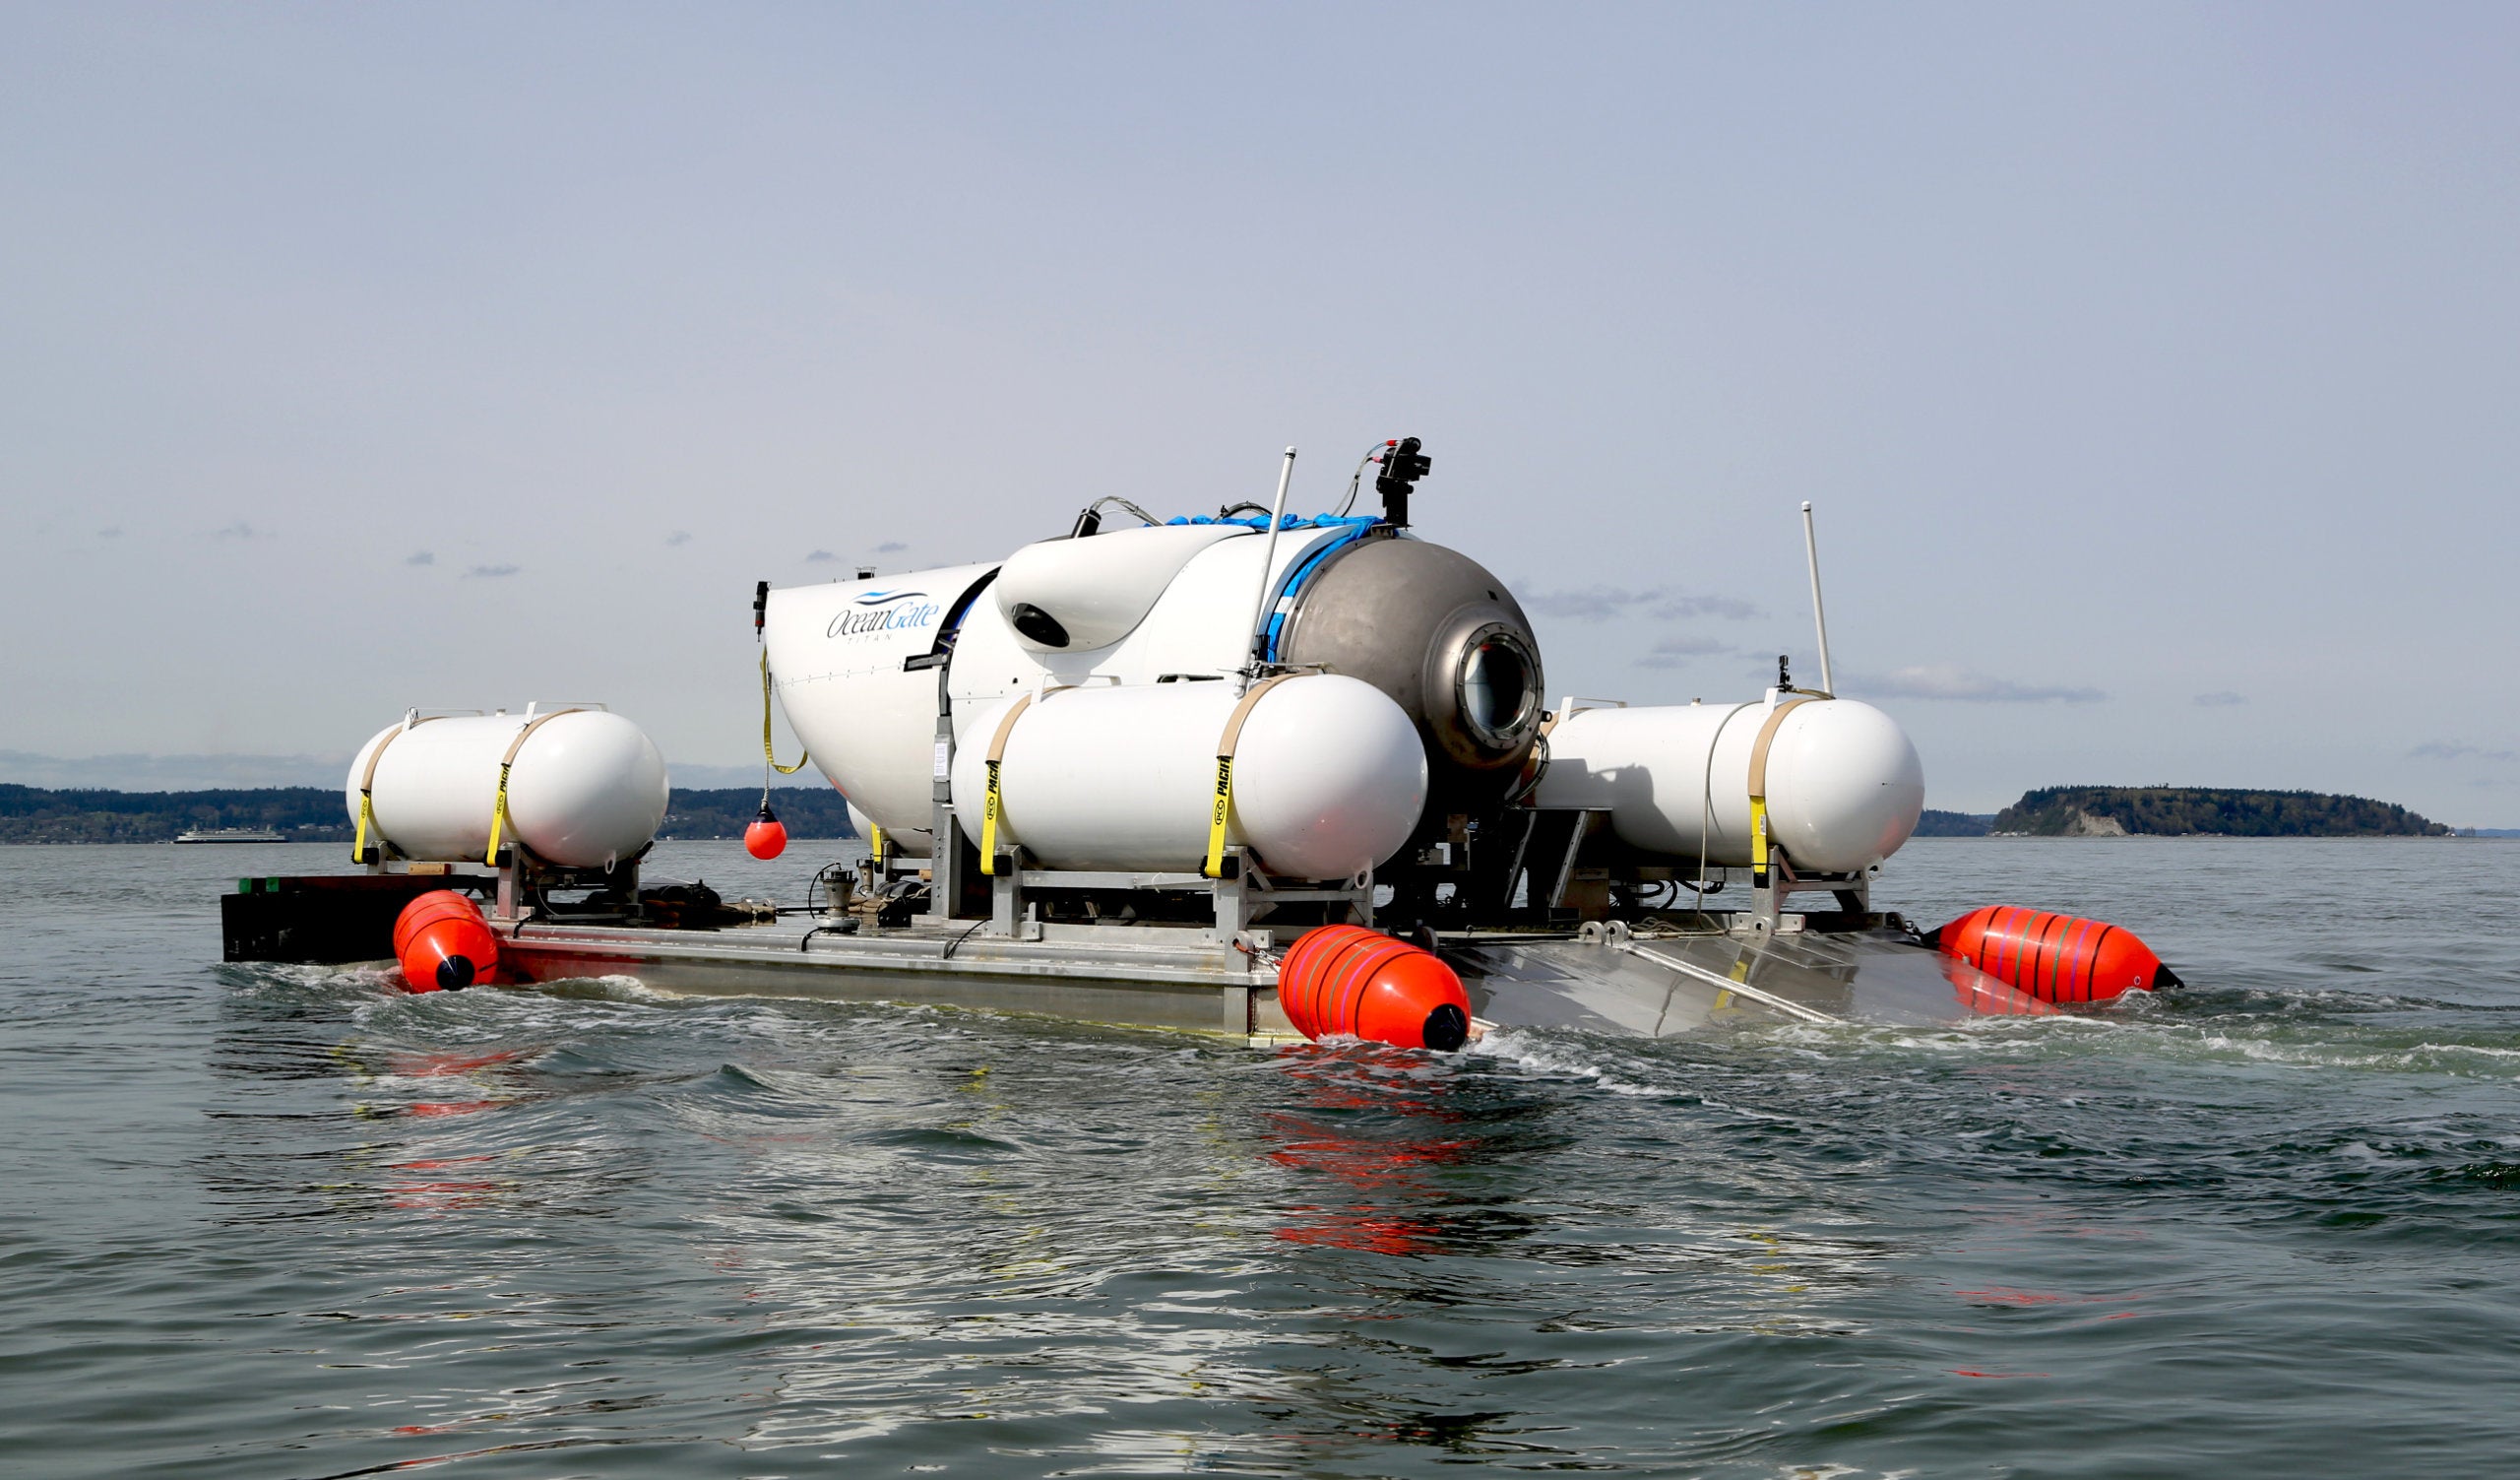 The submersible Titan on a transport platform in the ocean